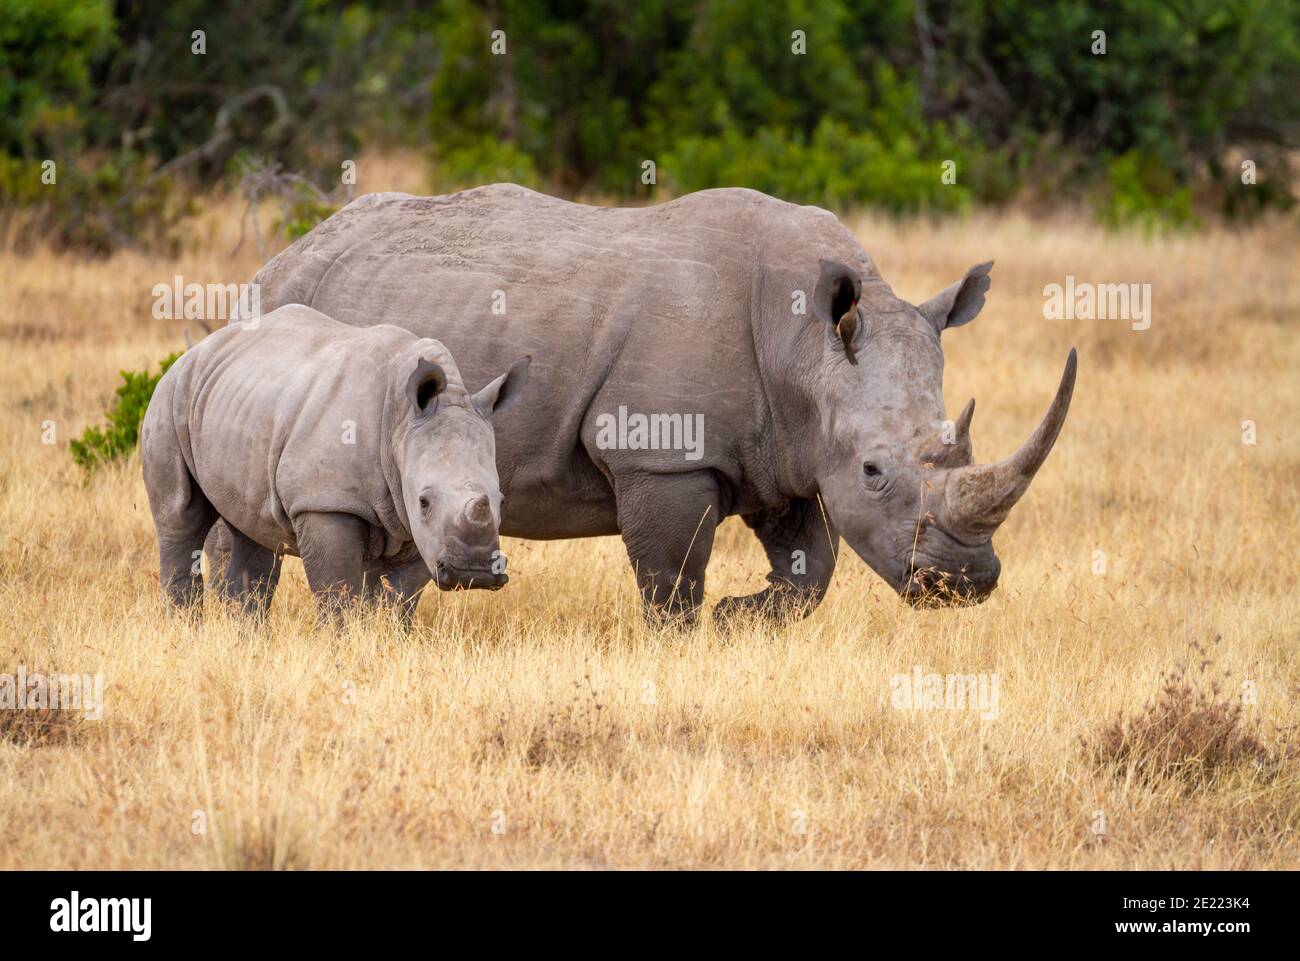 Southern white rhinoceros cow with baby calf (Ceratotherium simum) in Ol Pejeta Conservancy, Kenya, Africa. Near threatened African rhino species Stock Photo